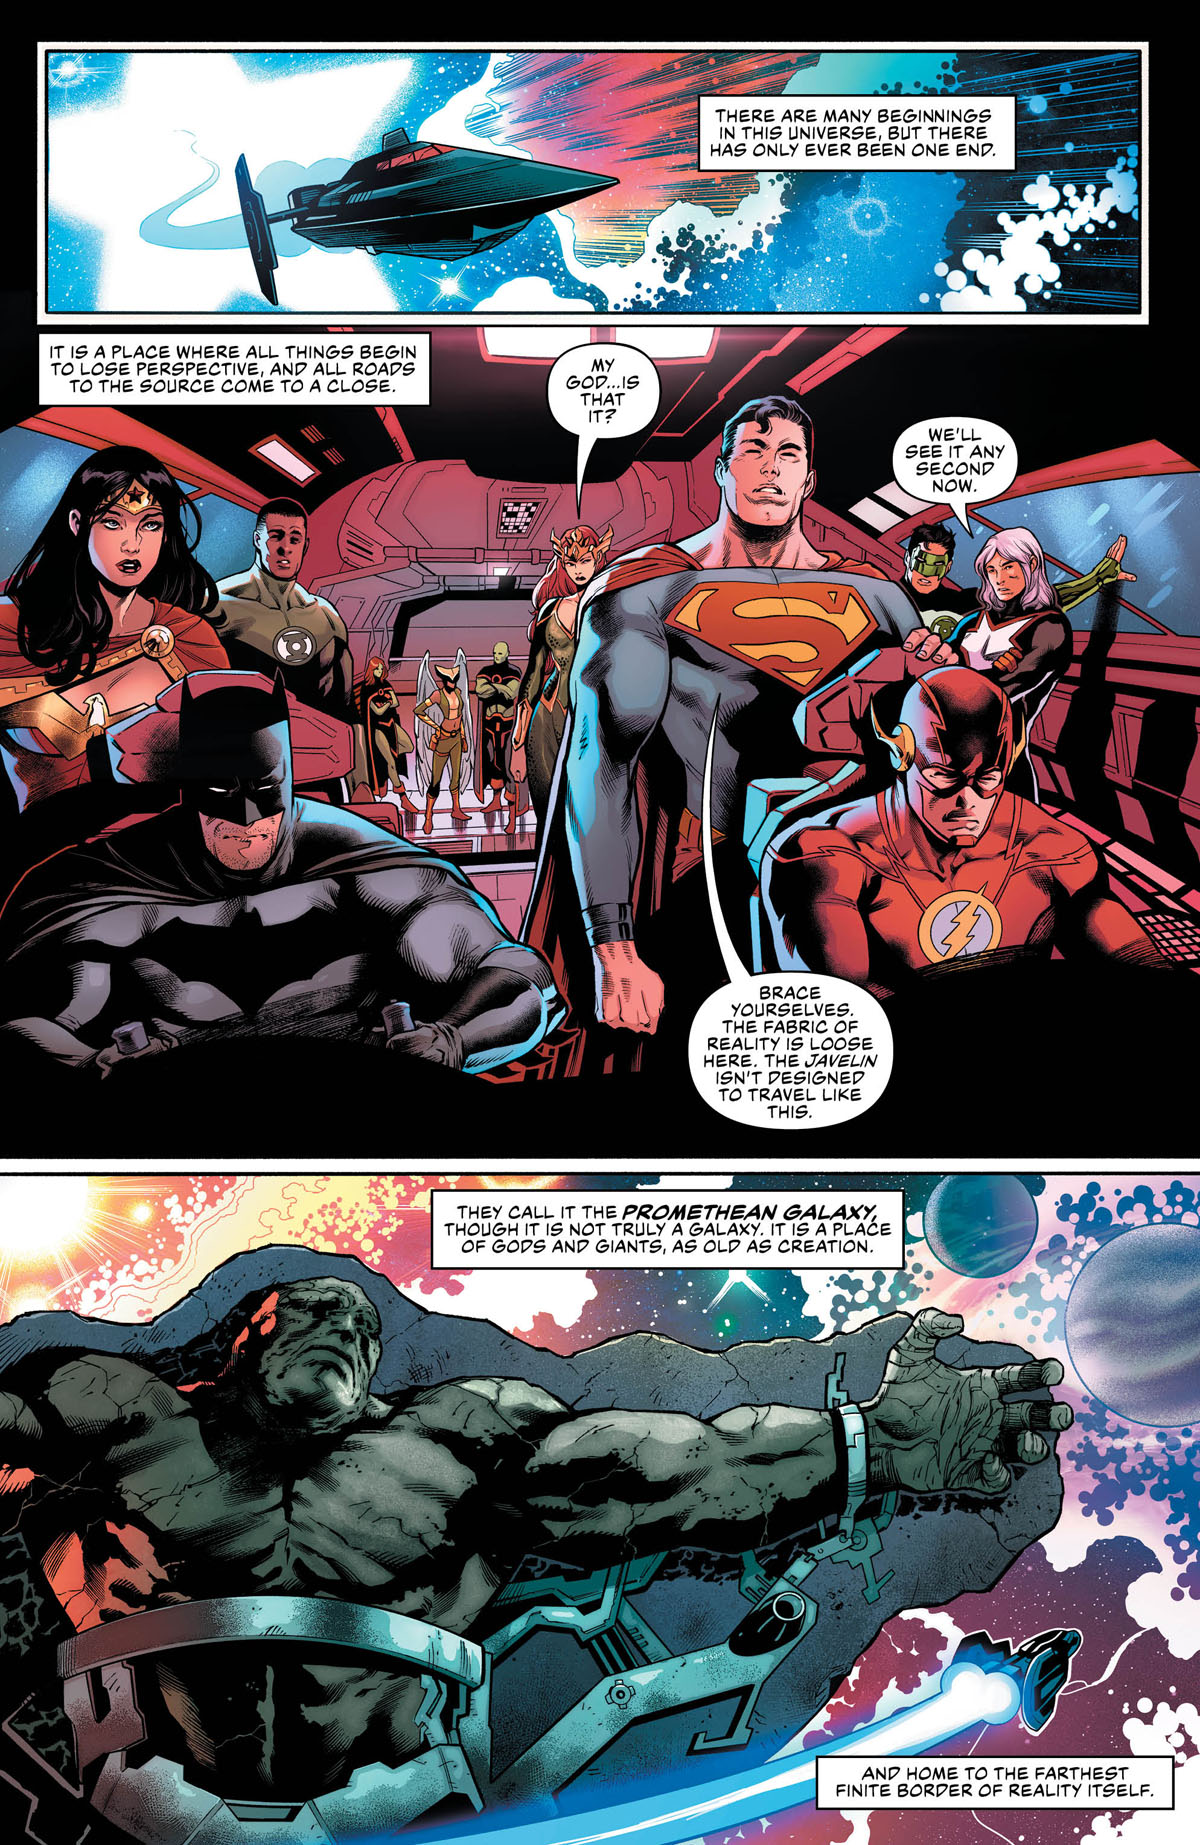 Justice League Annual #1 page 1